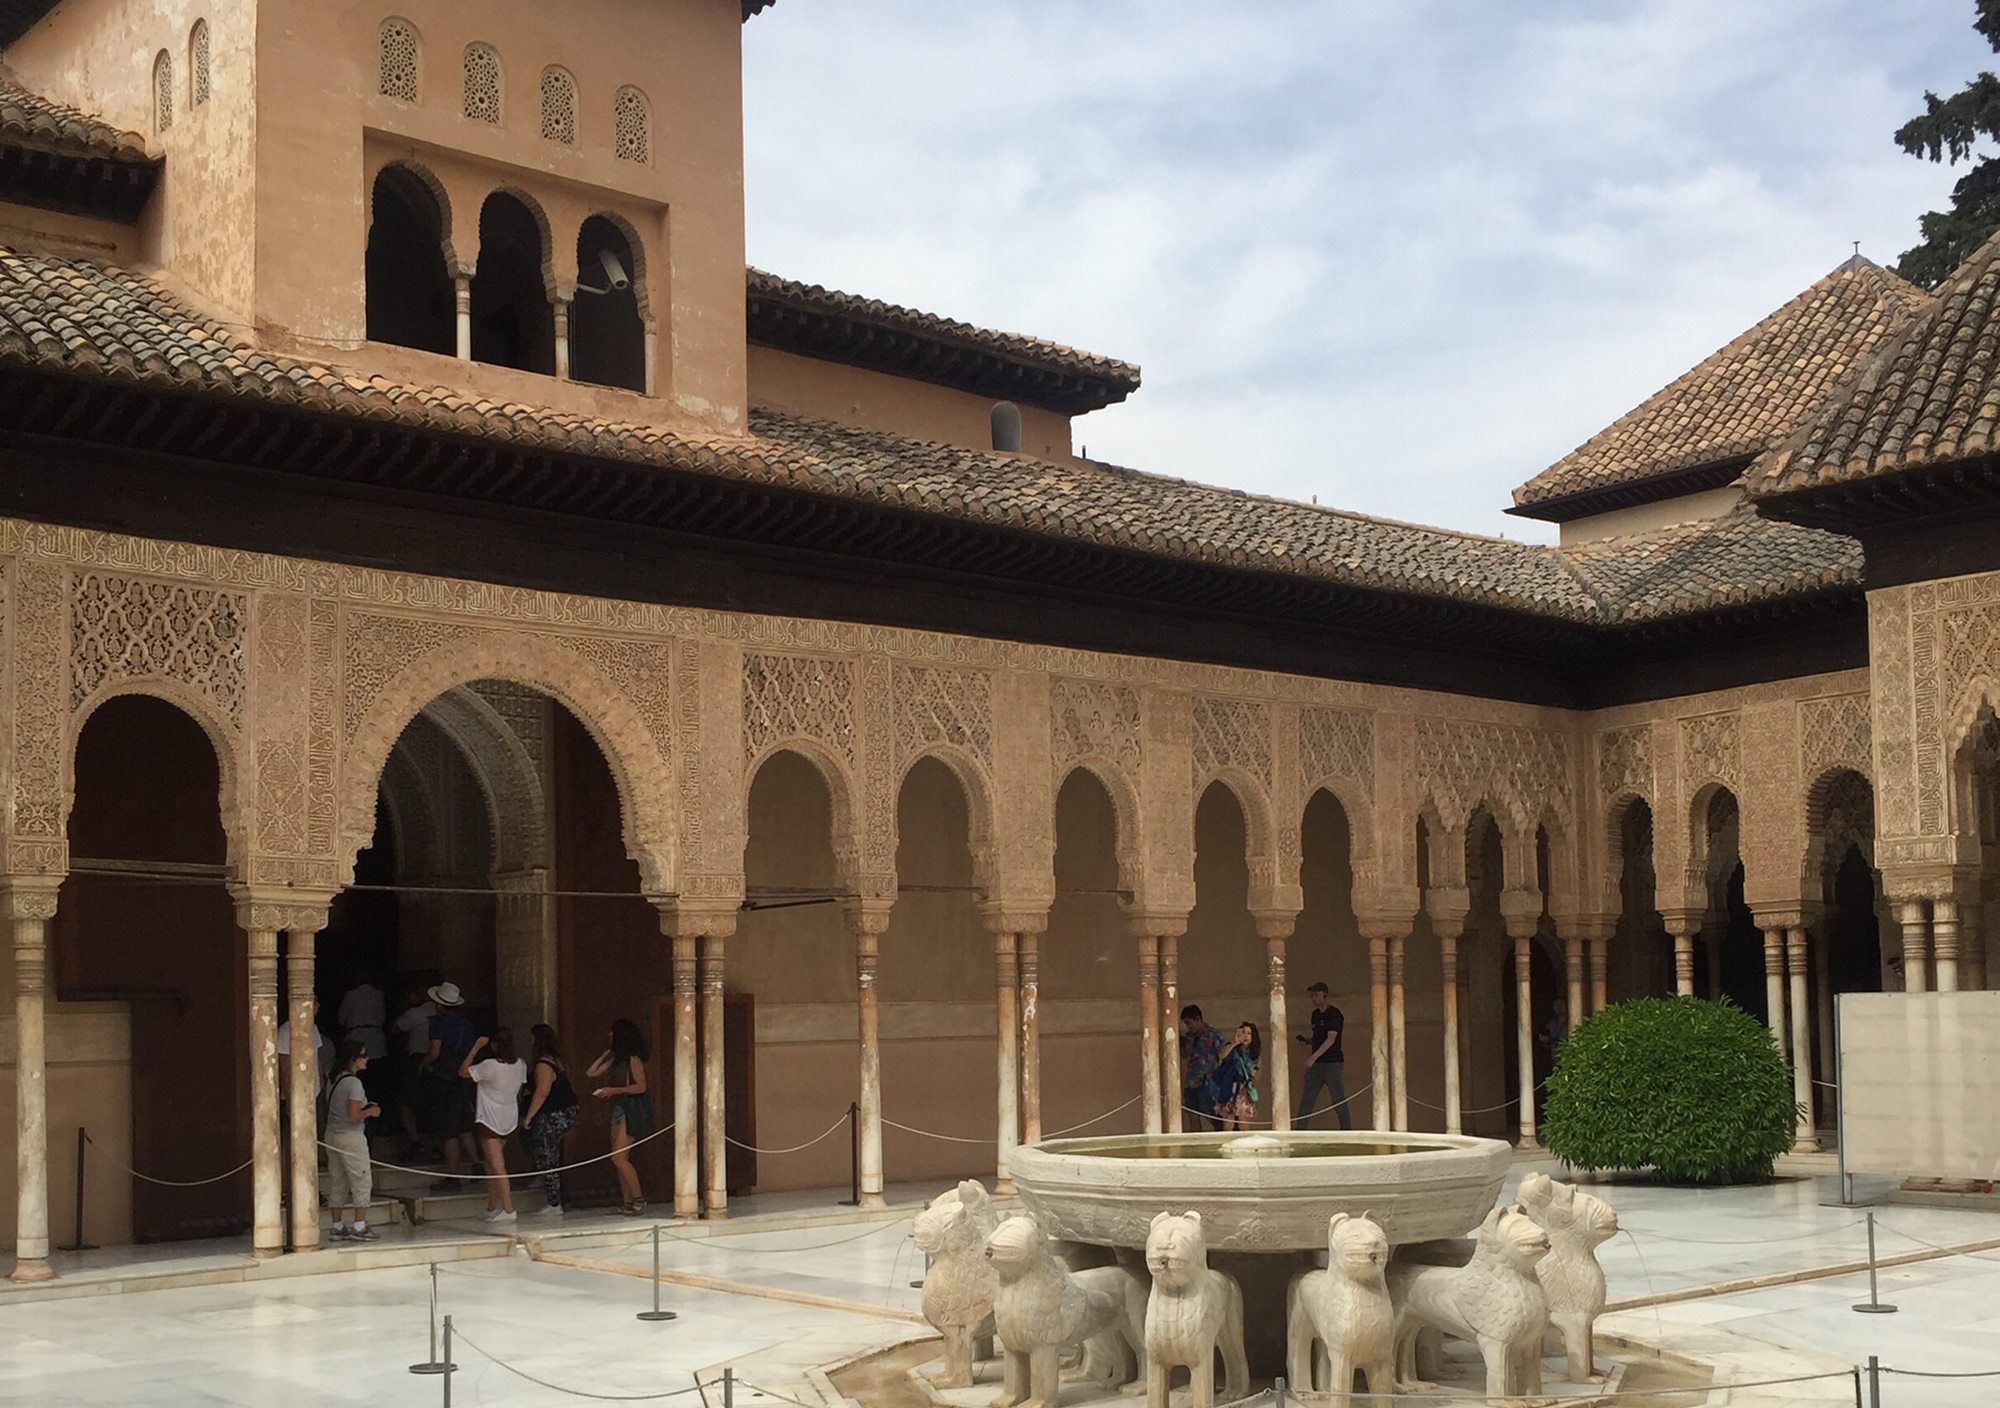 Private tour exploring the Alhambra and the Generalife